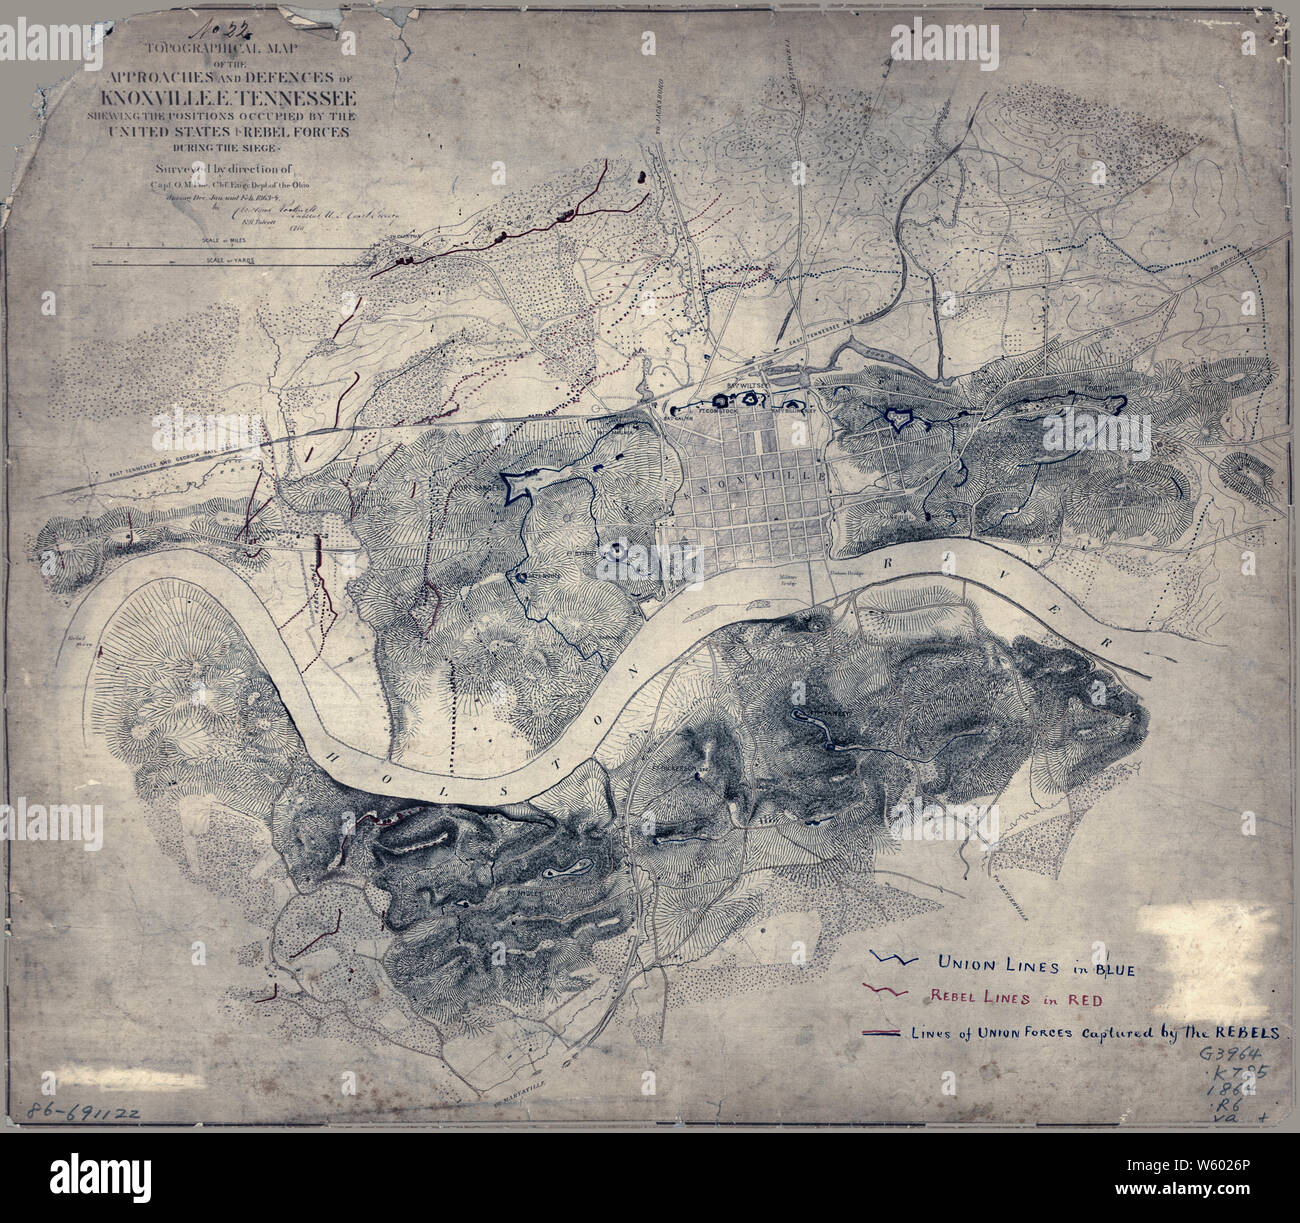 Civil War Maps 1838 Topographical map of the approaches and defences of Knoxville E Tennessee shewing the positions occupied by the United States Rebel forces during the siege Rebuild and Repair Stock Photo